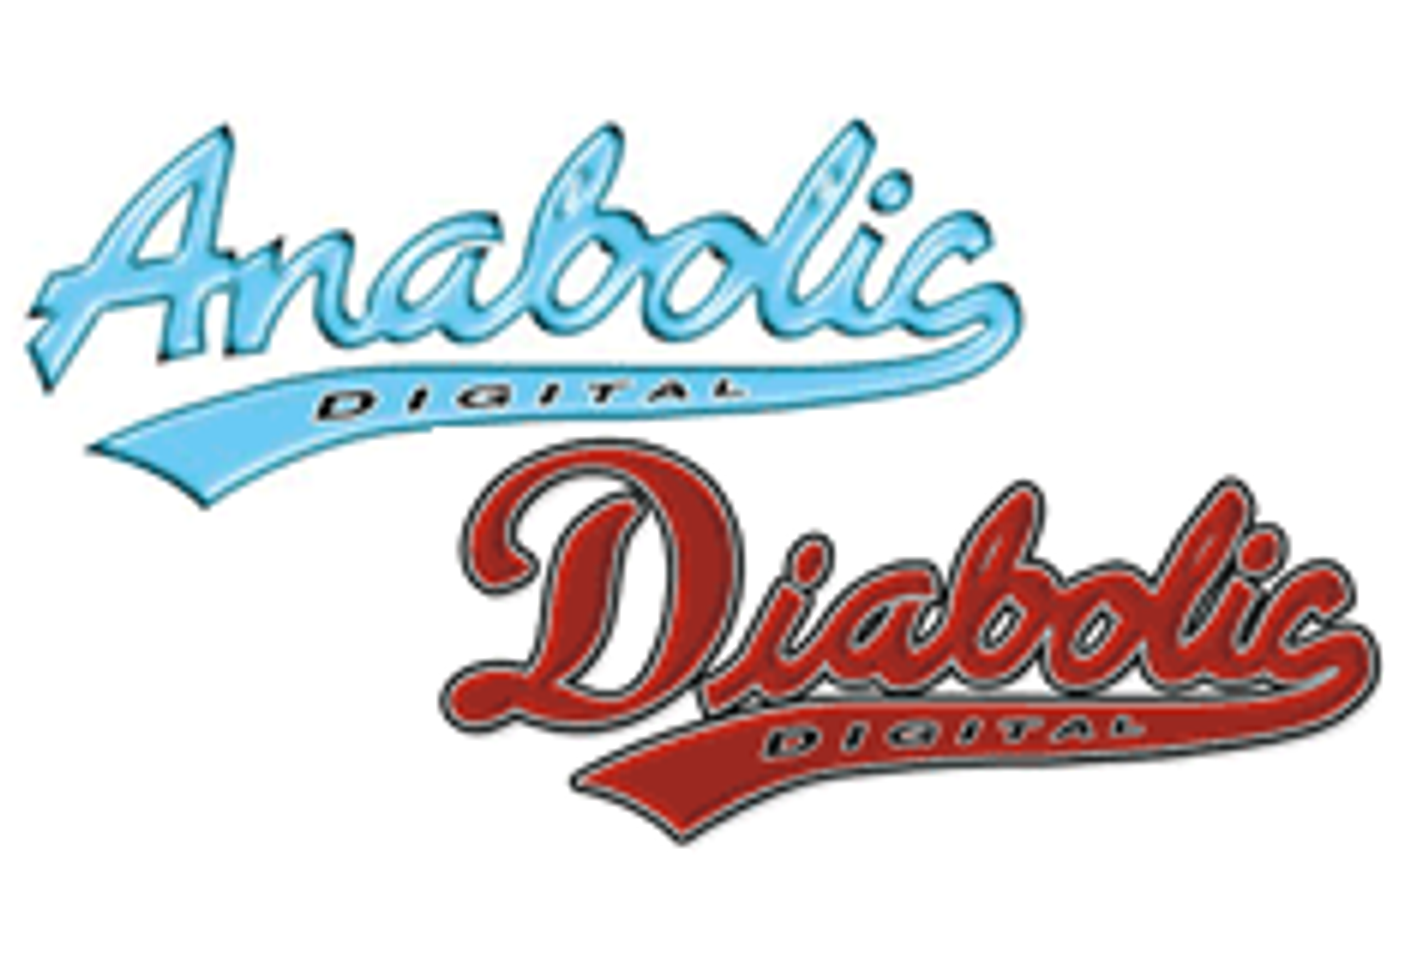 Diabolic, Anabolic Cut European Ties, Sign with Playhouse